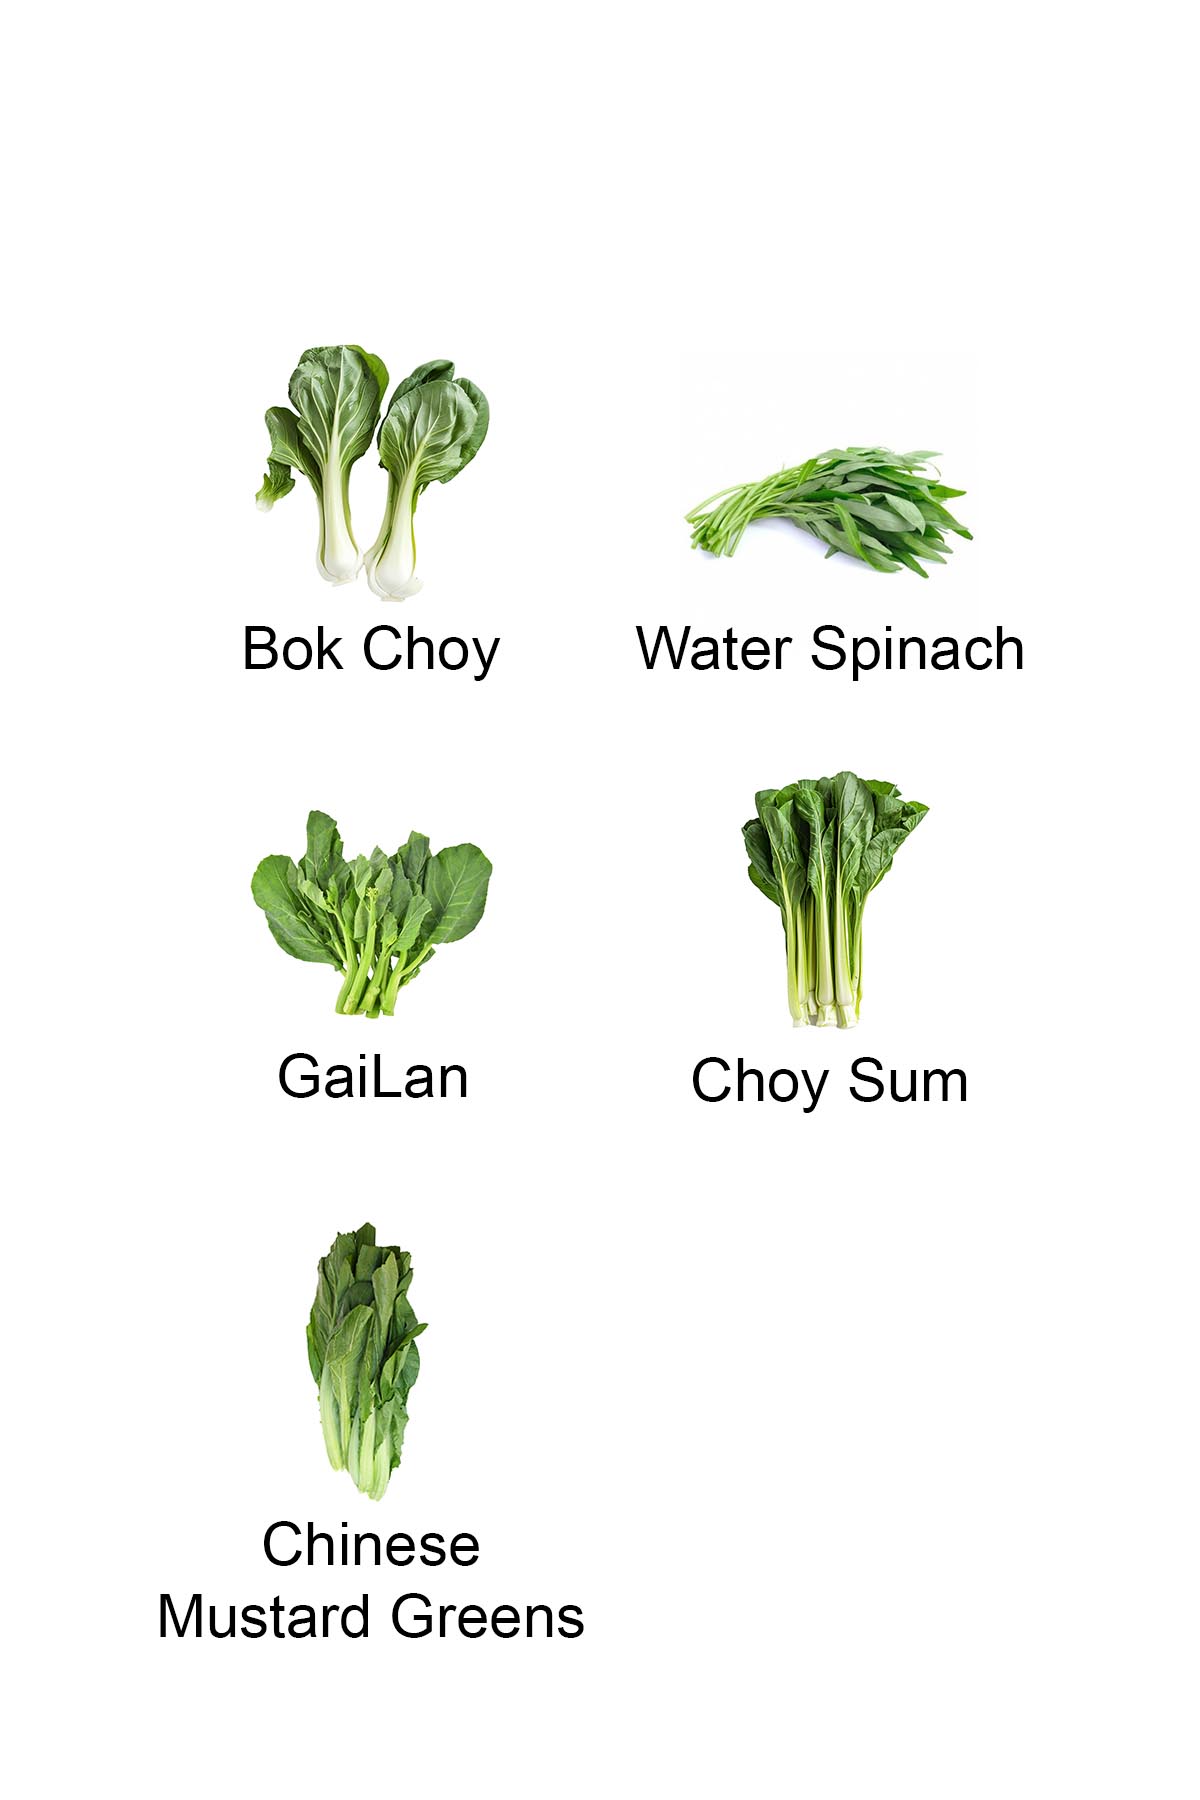 Chinese greens vegetables: Bok Choy, Gailan, Water Spinach, Choy Sum, and Chinese Mustard Greens.